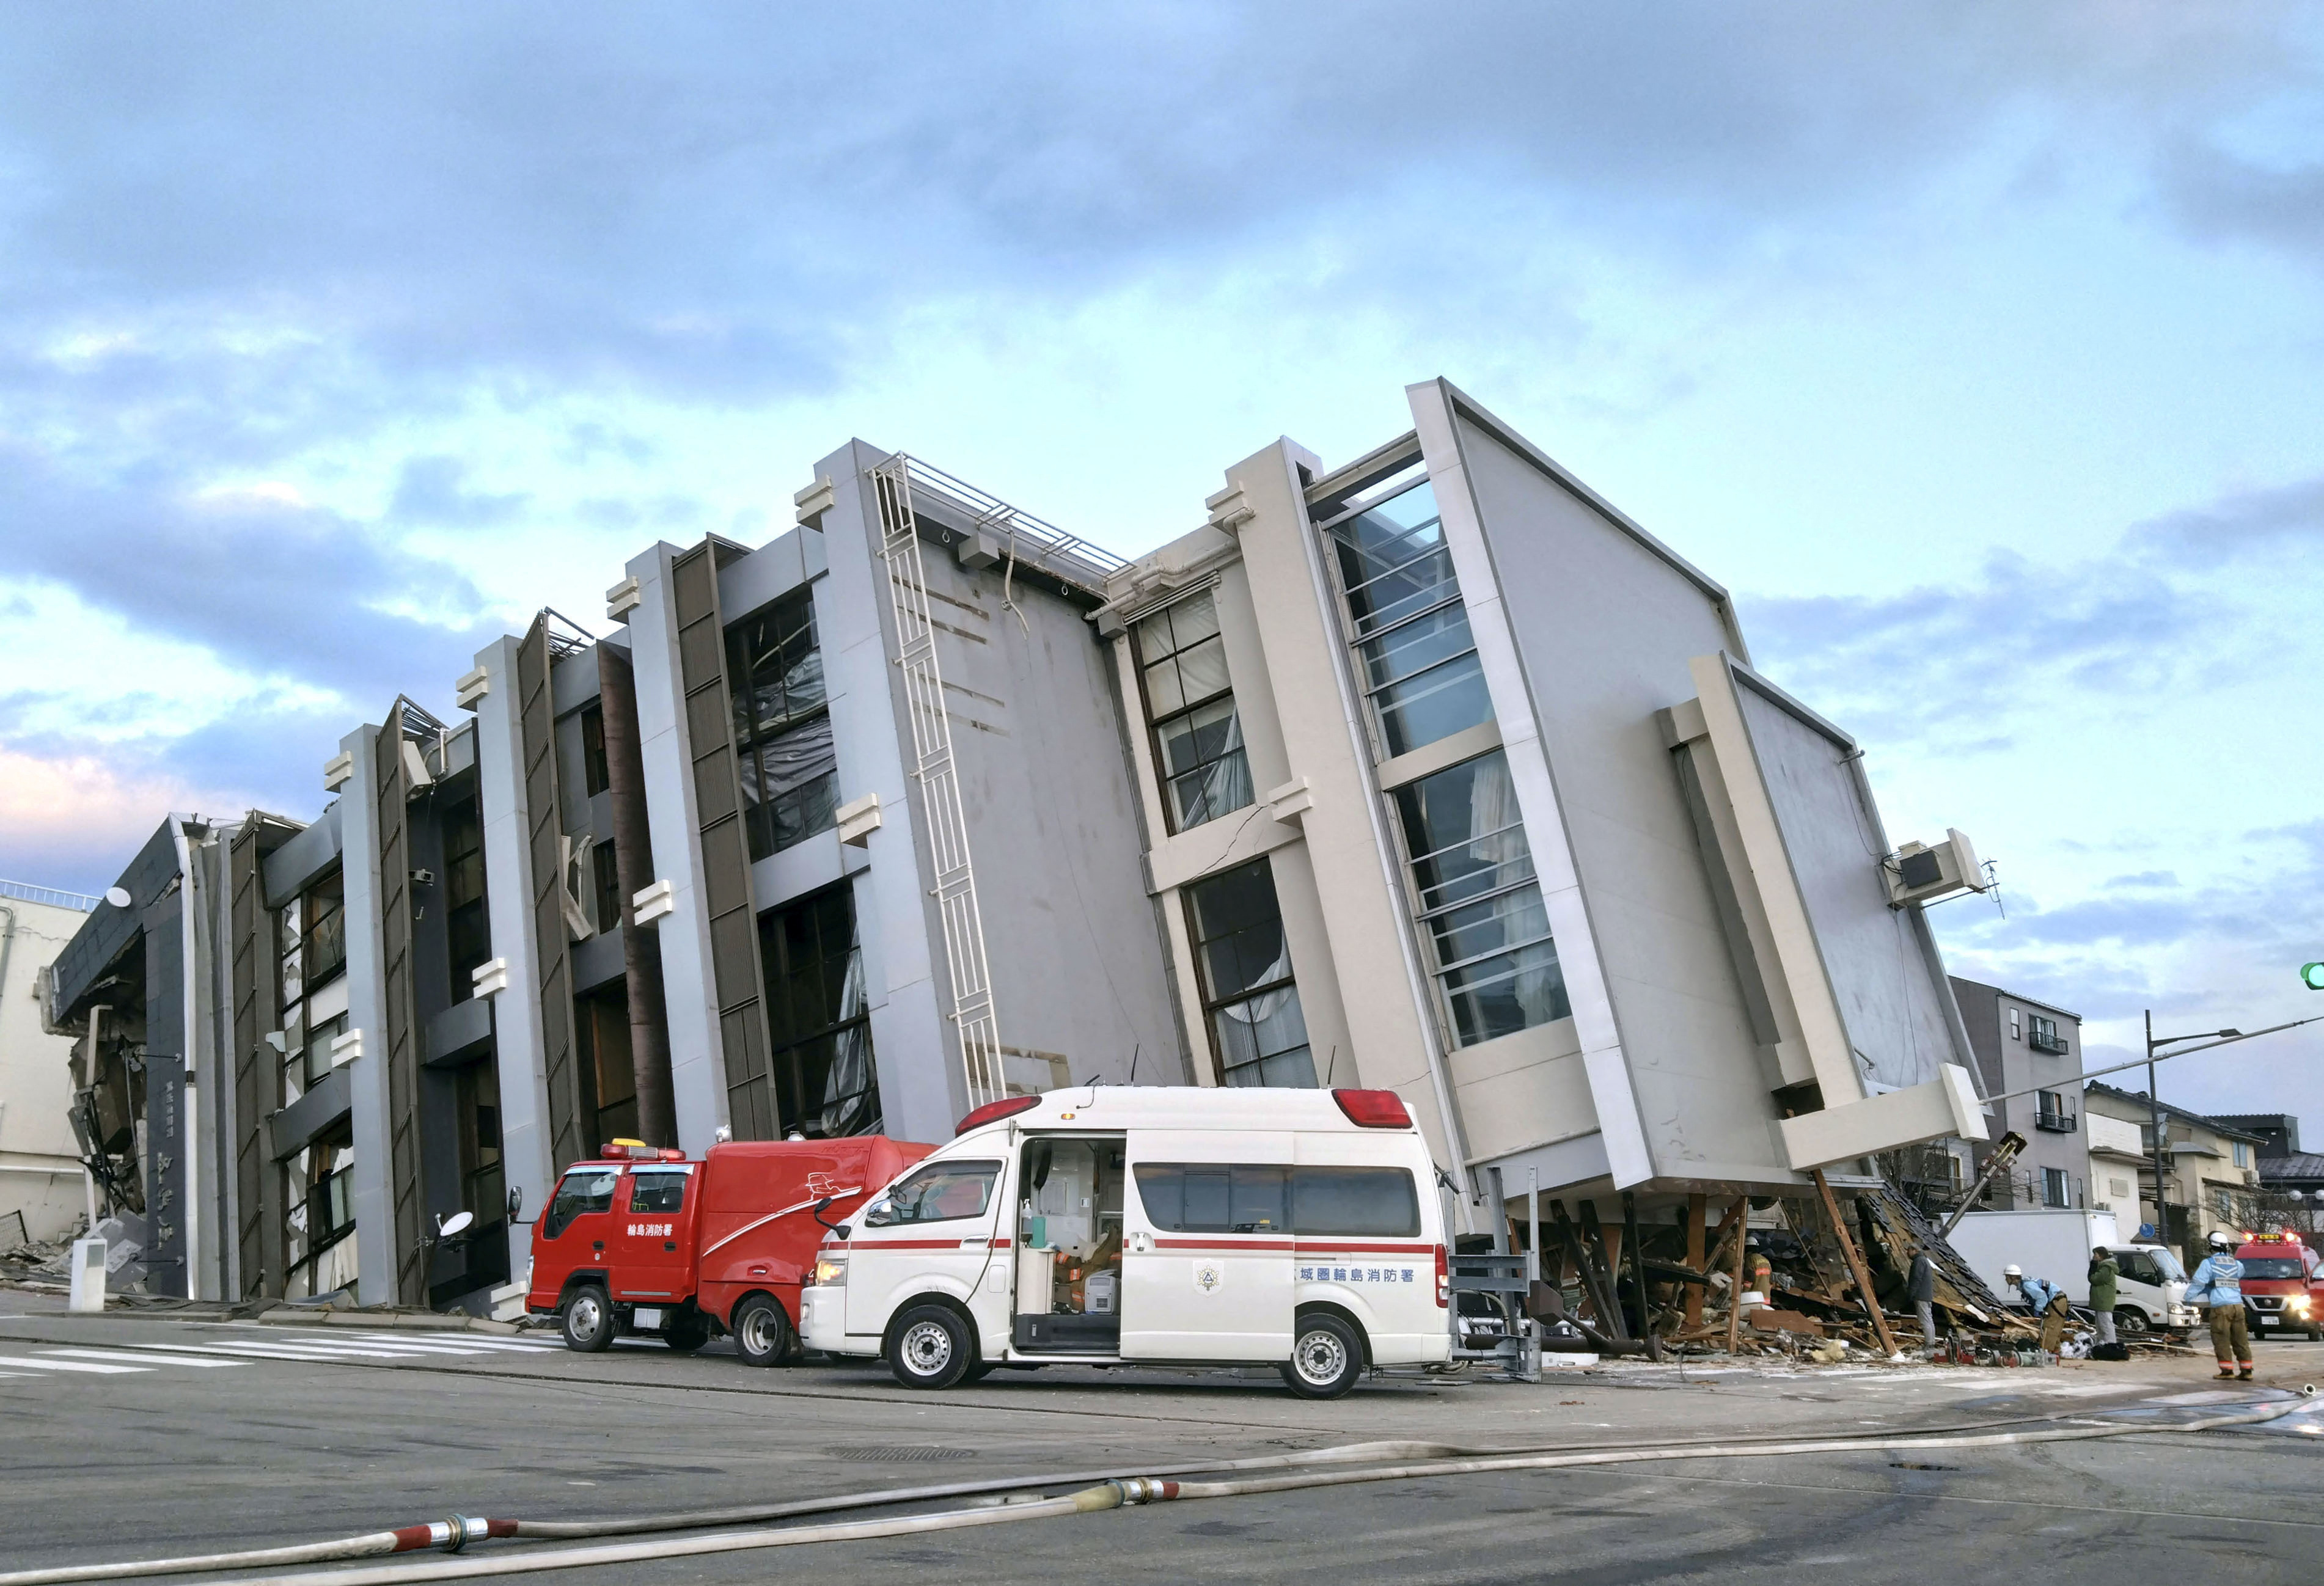 A collapsed building caused by an earthquake is seen in Wajima, Japan